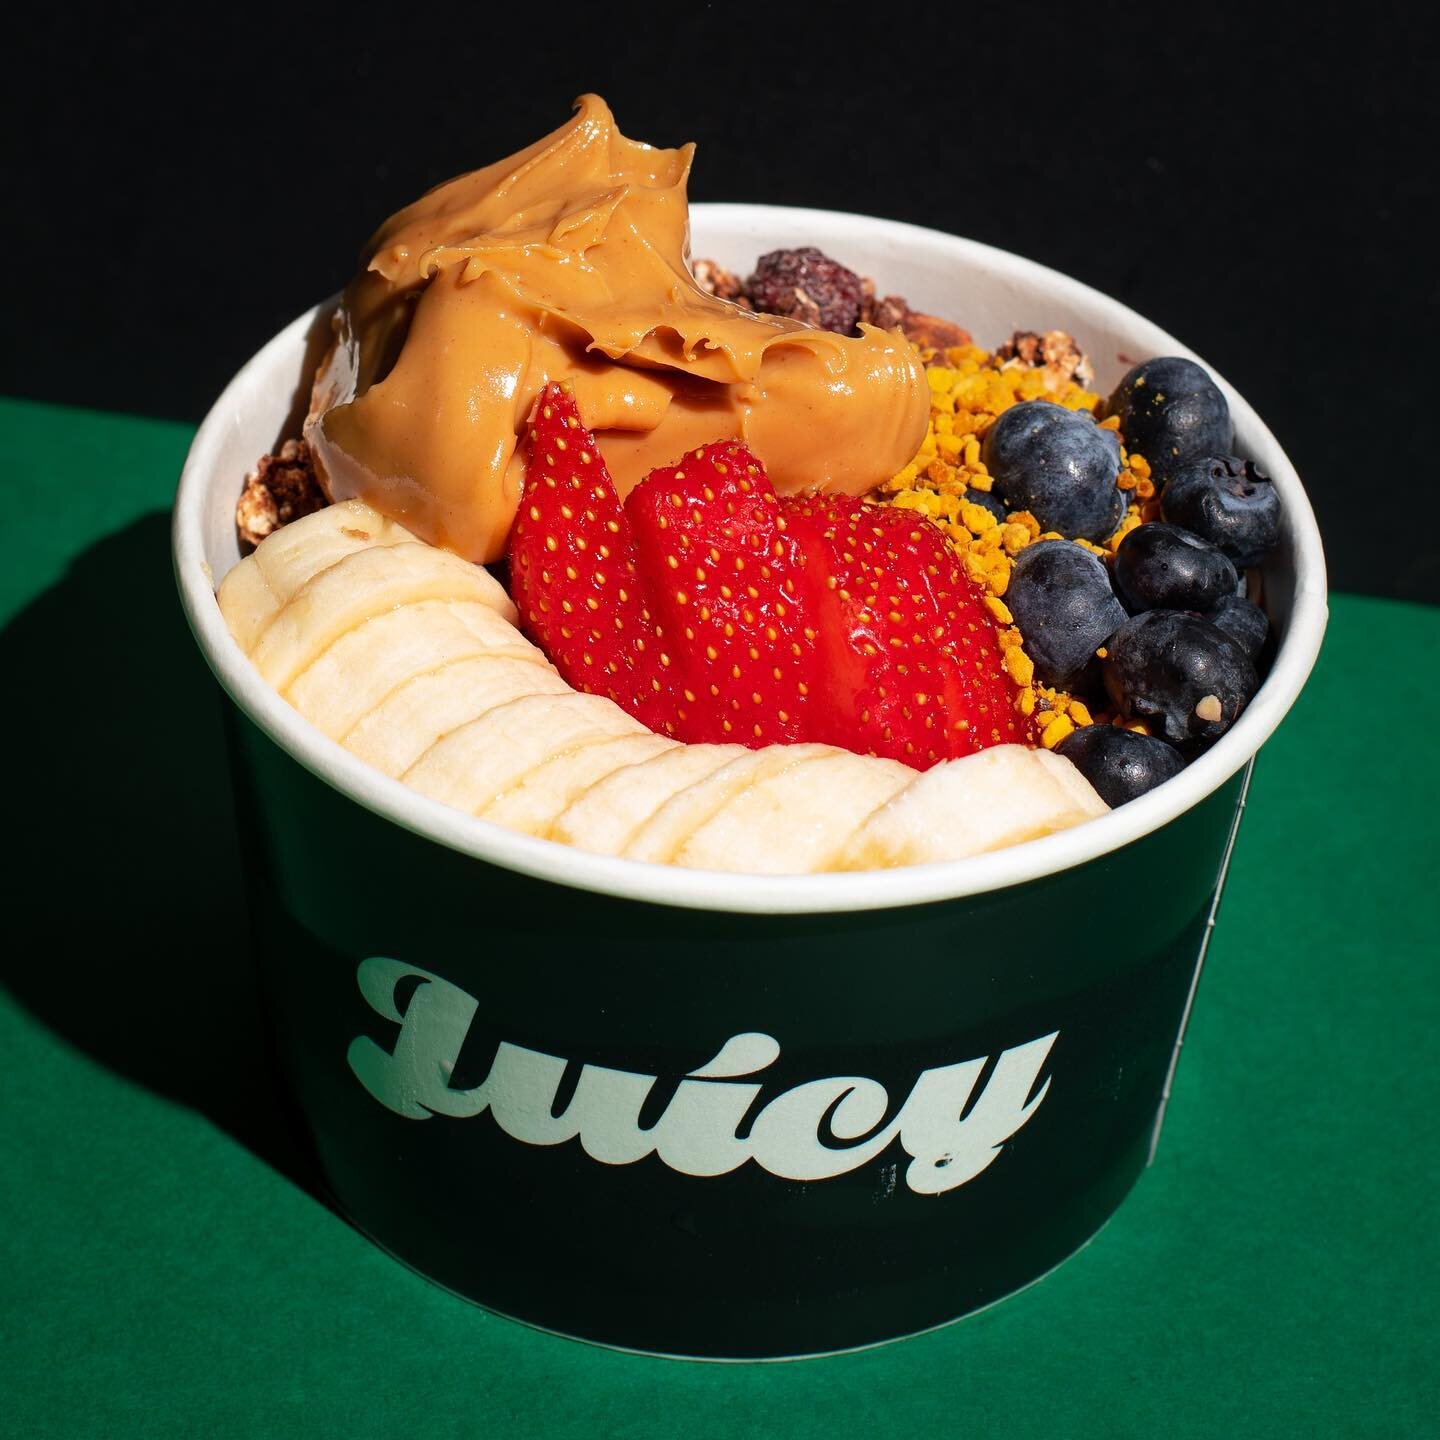 Monday spotlight ✨ 

These little bowls of beauty branded with the infamous juicy logo helping make the streets of Glasgow a healthier and happier place ☺️

Do you opt for our fluffy coconut and chai porridge or our sweet and creamy acai base? 

An a